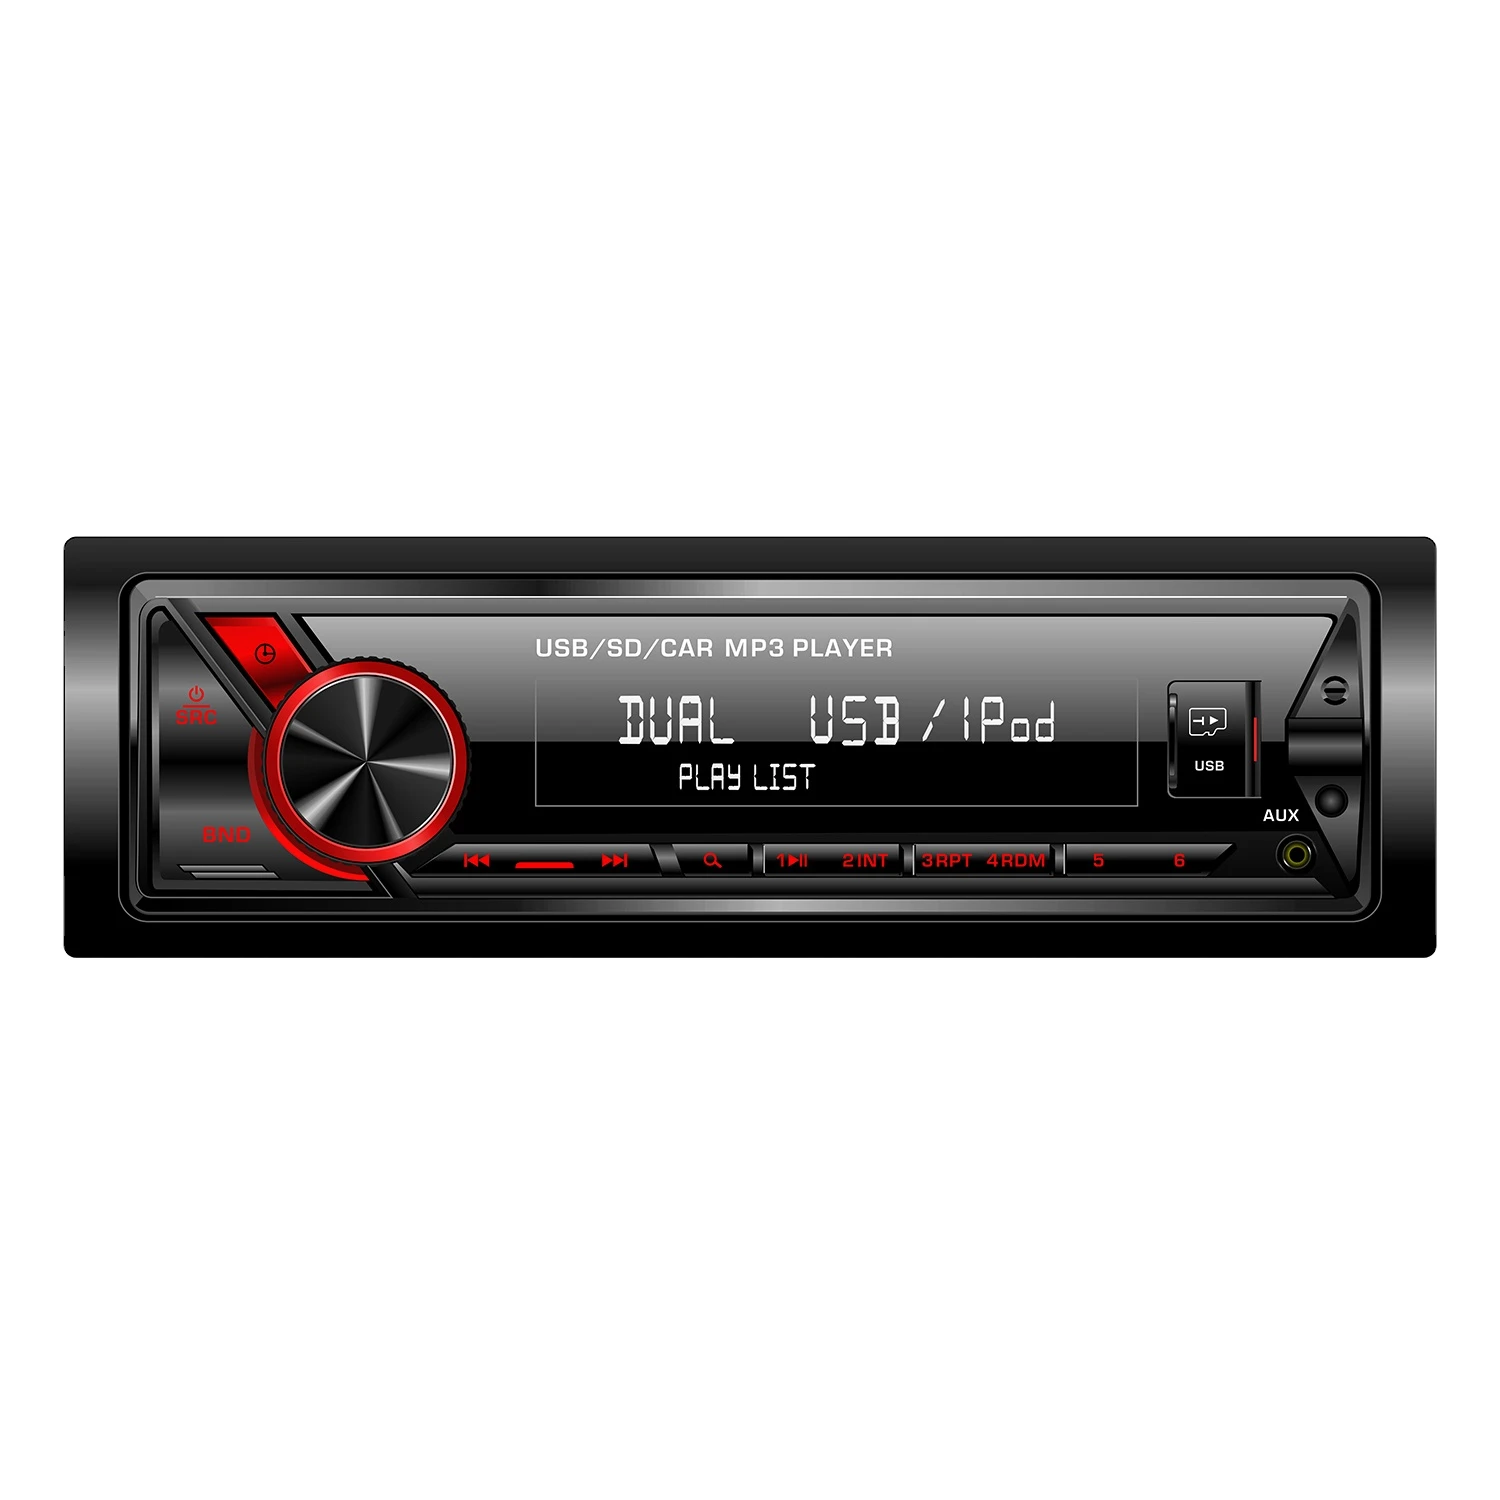 The best selling mini portable in 2020 Bt navigation with LCD wireless touch screen car radio